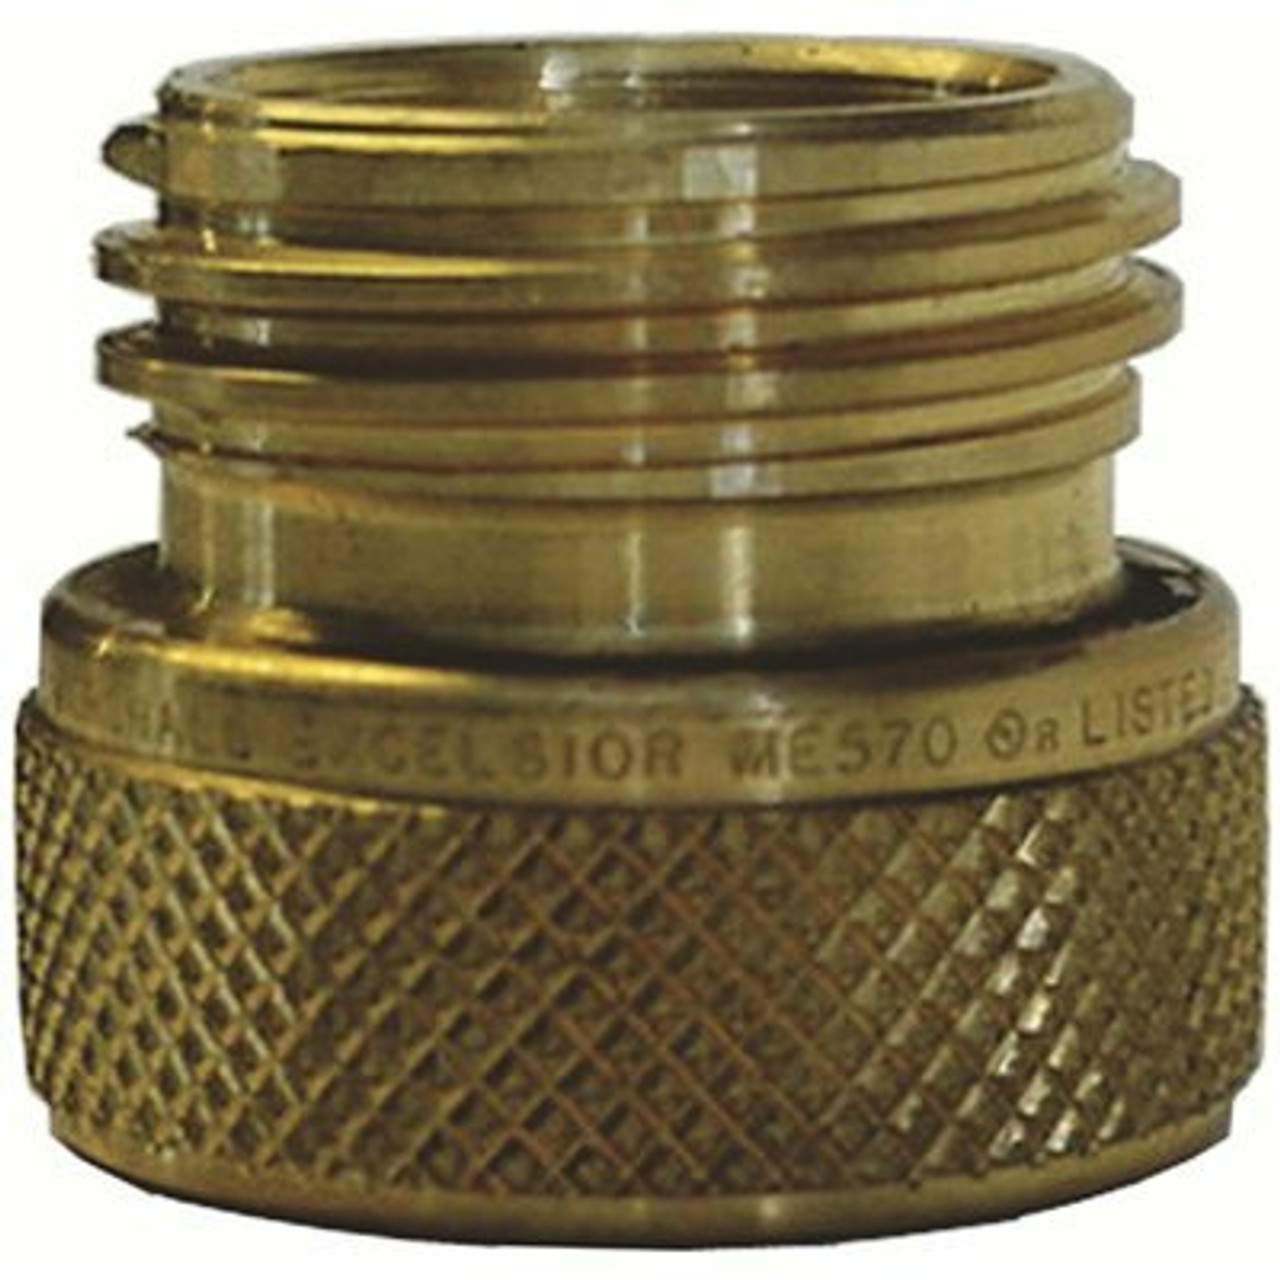 Mec Gas Fill Check Adapter Fitting 1-3/4 In. F X 1-3/4 In. M